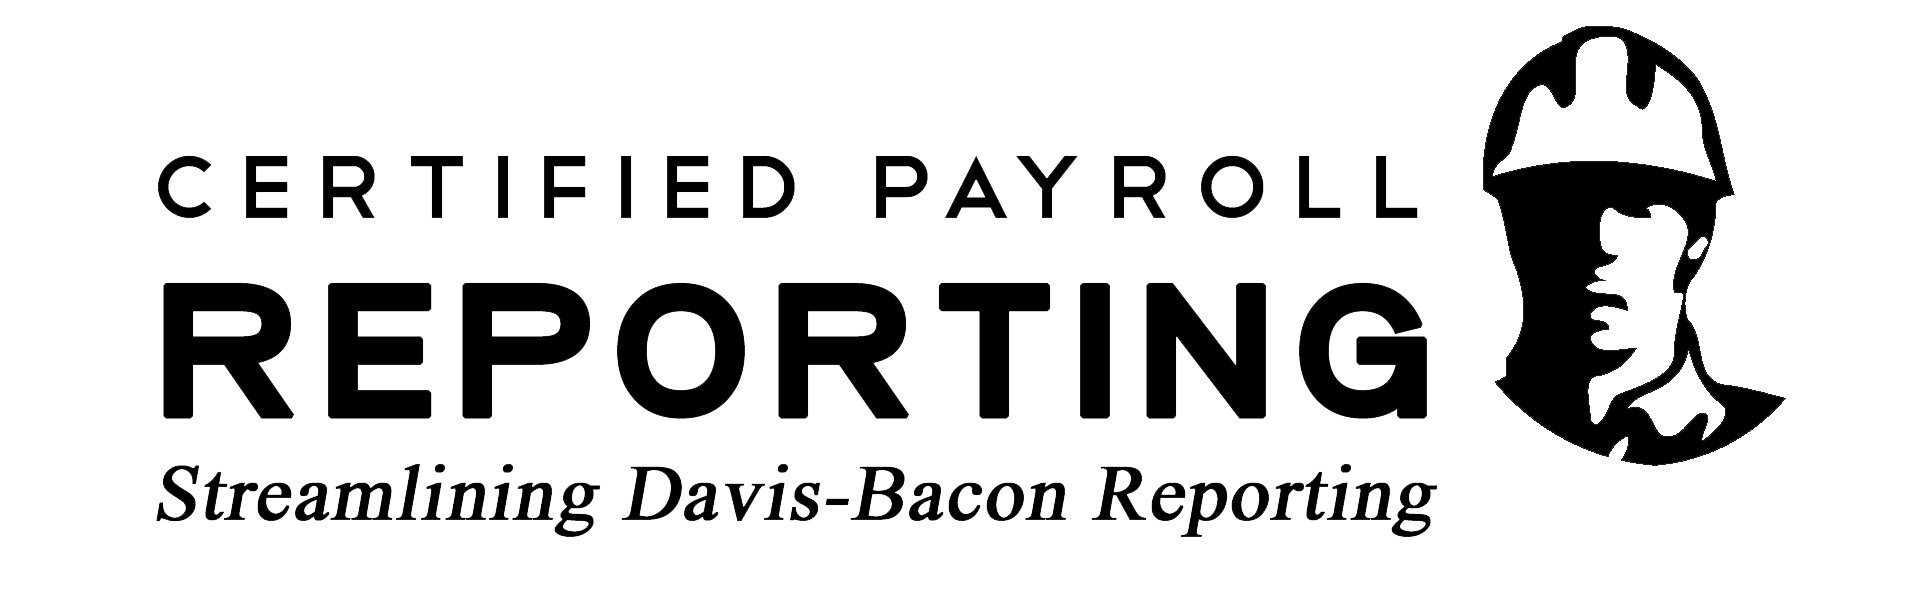 Certified Payroll Reporting